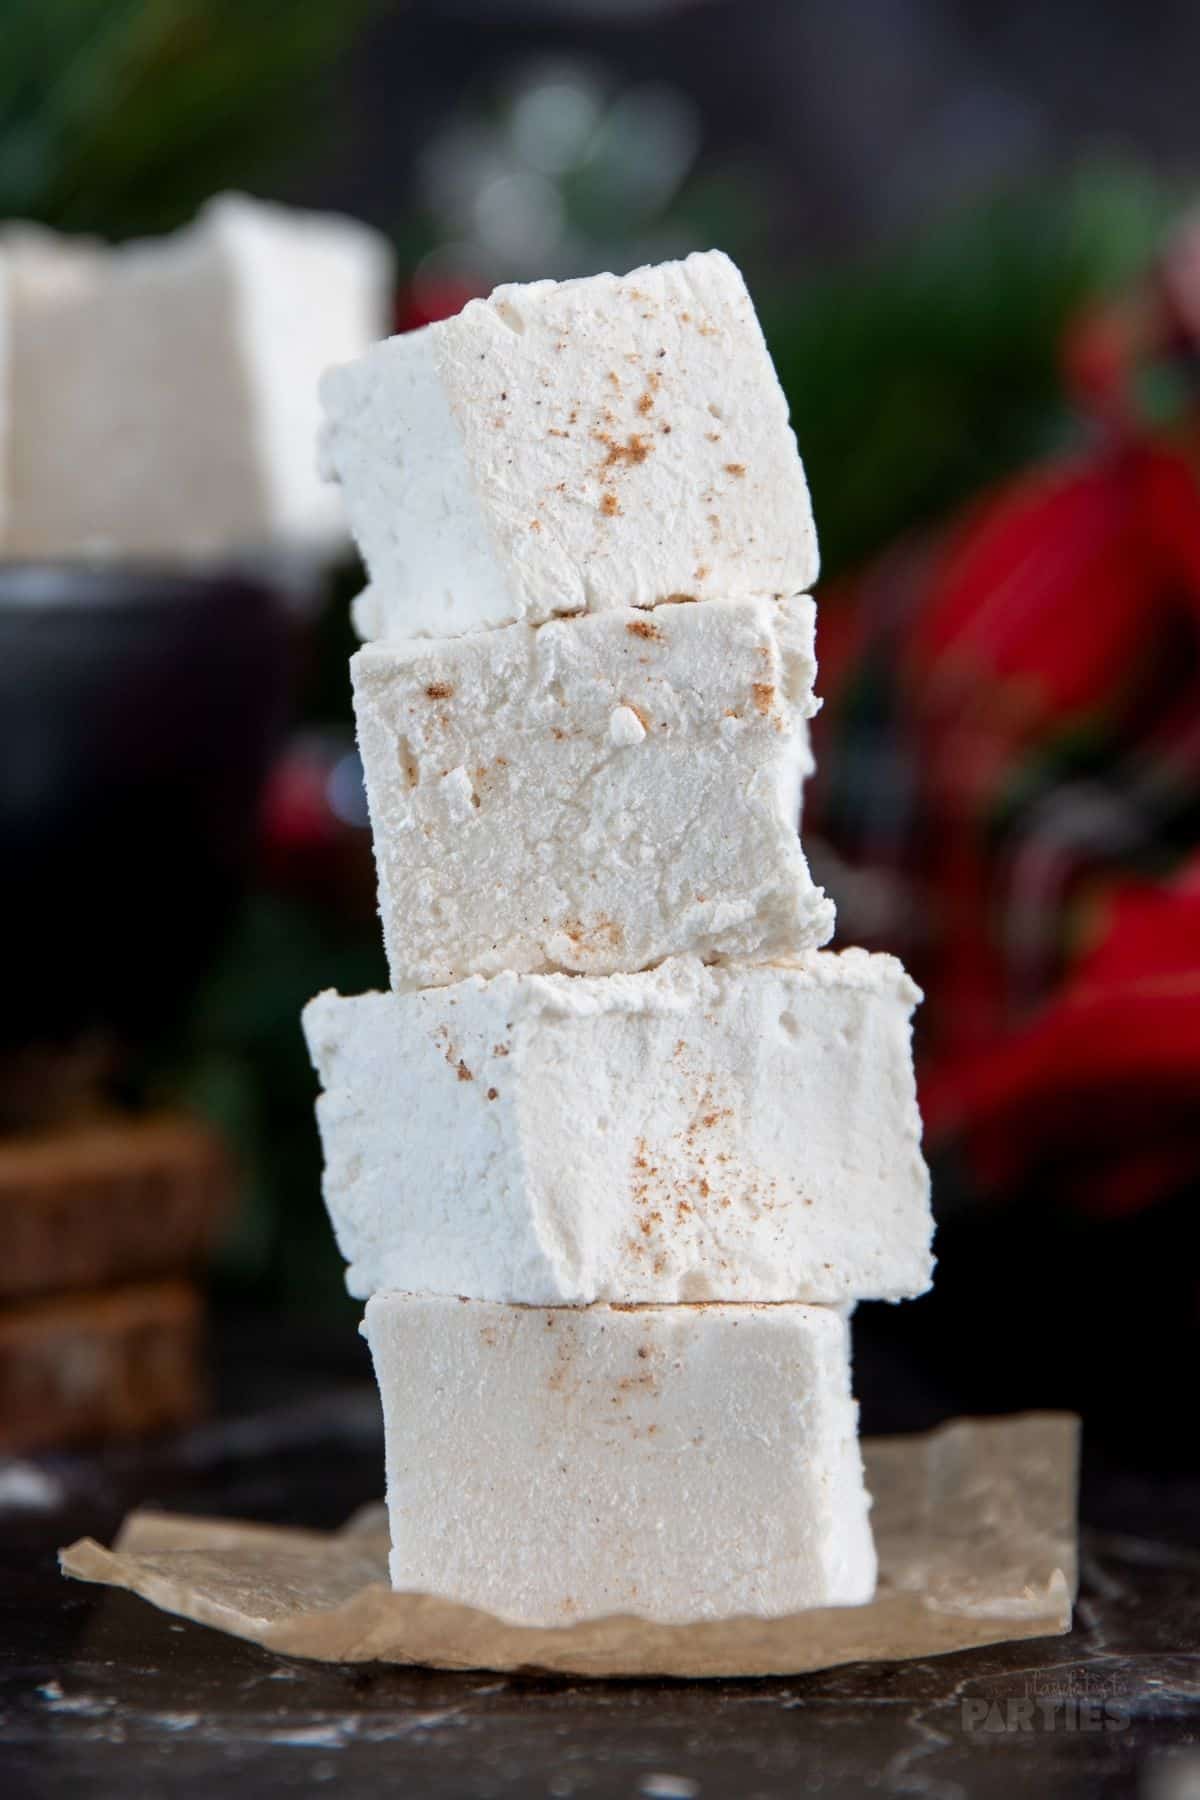 Four white homemade marshmallows dusted with nutmeg.